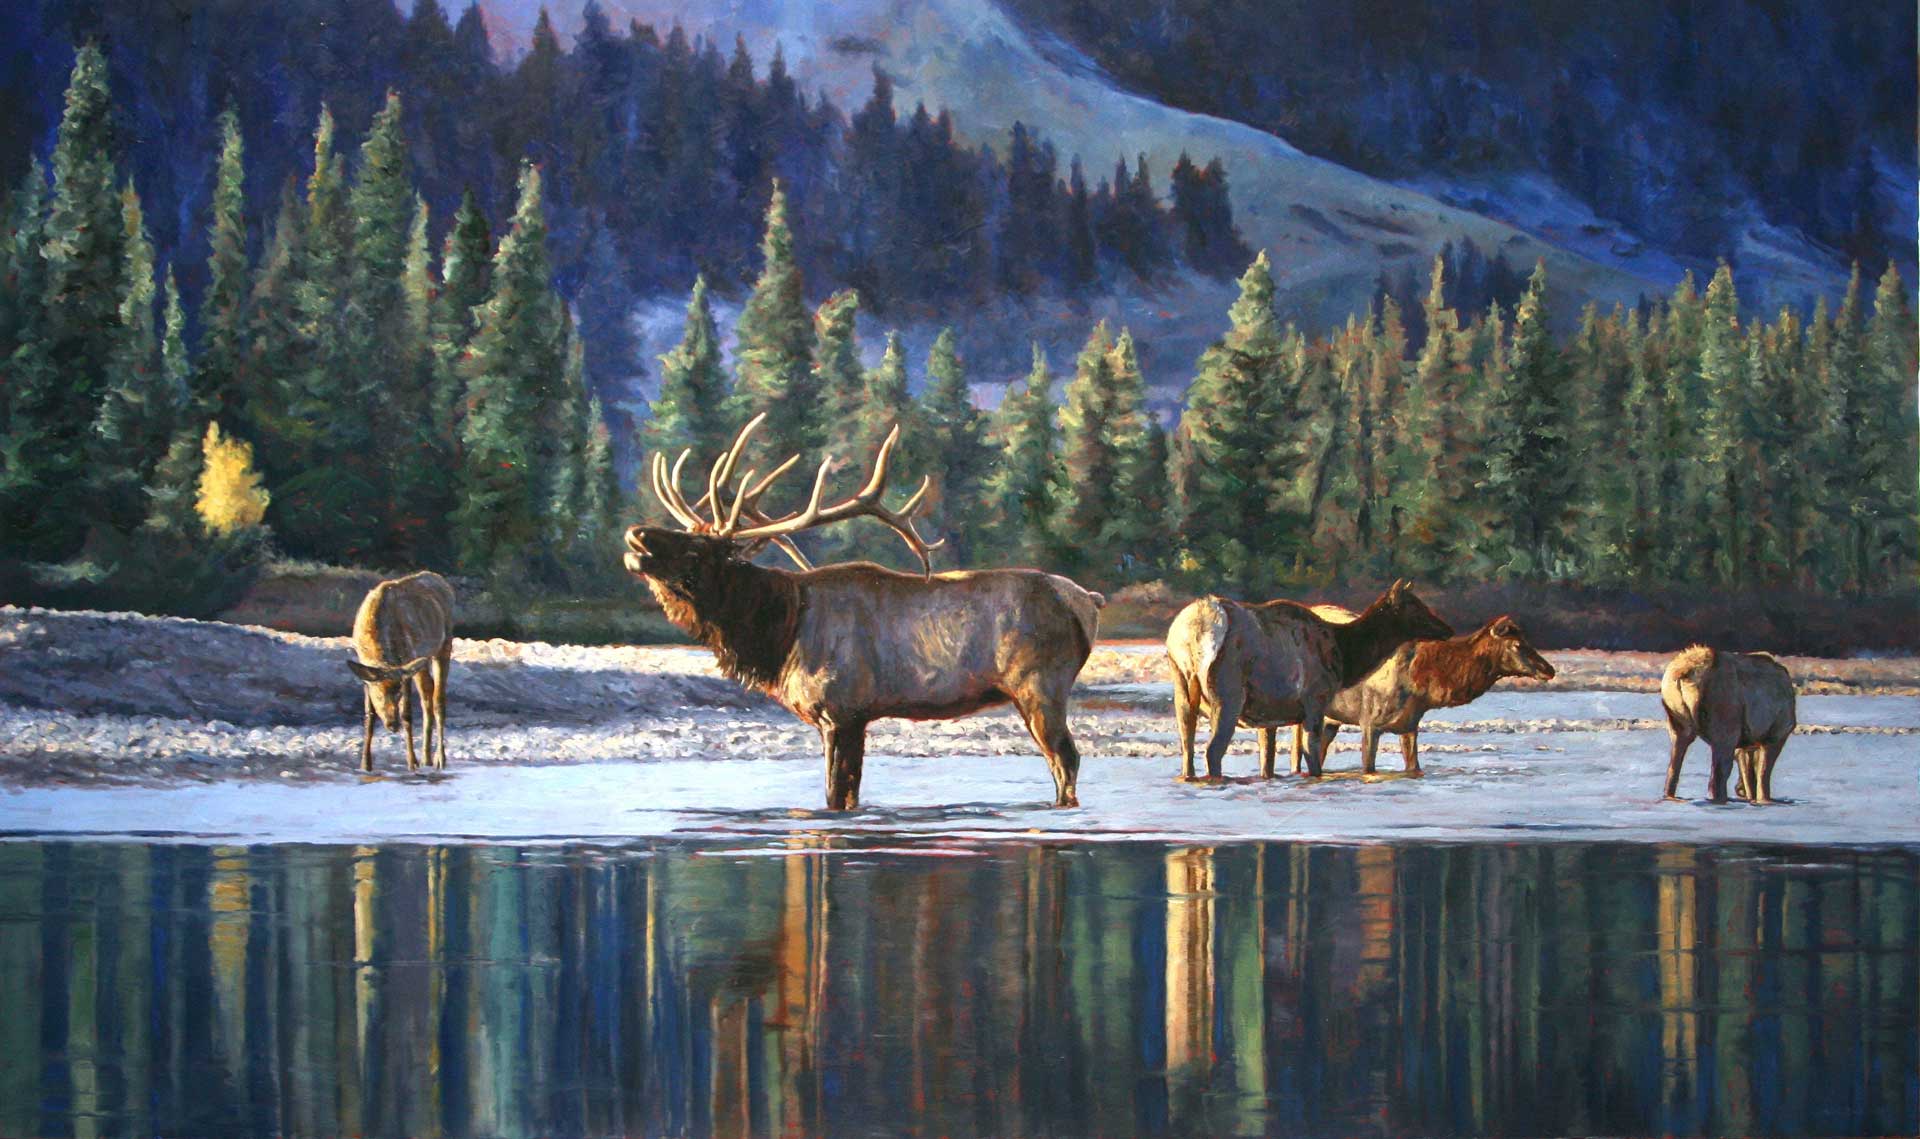 Call of the Wild. Original oil painting by Linda Besse that resulted in her being named the 2017 Rocky Mountain Elk Foundation Artist of the Year. 